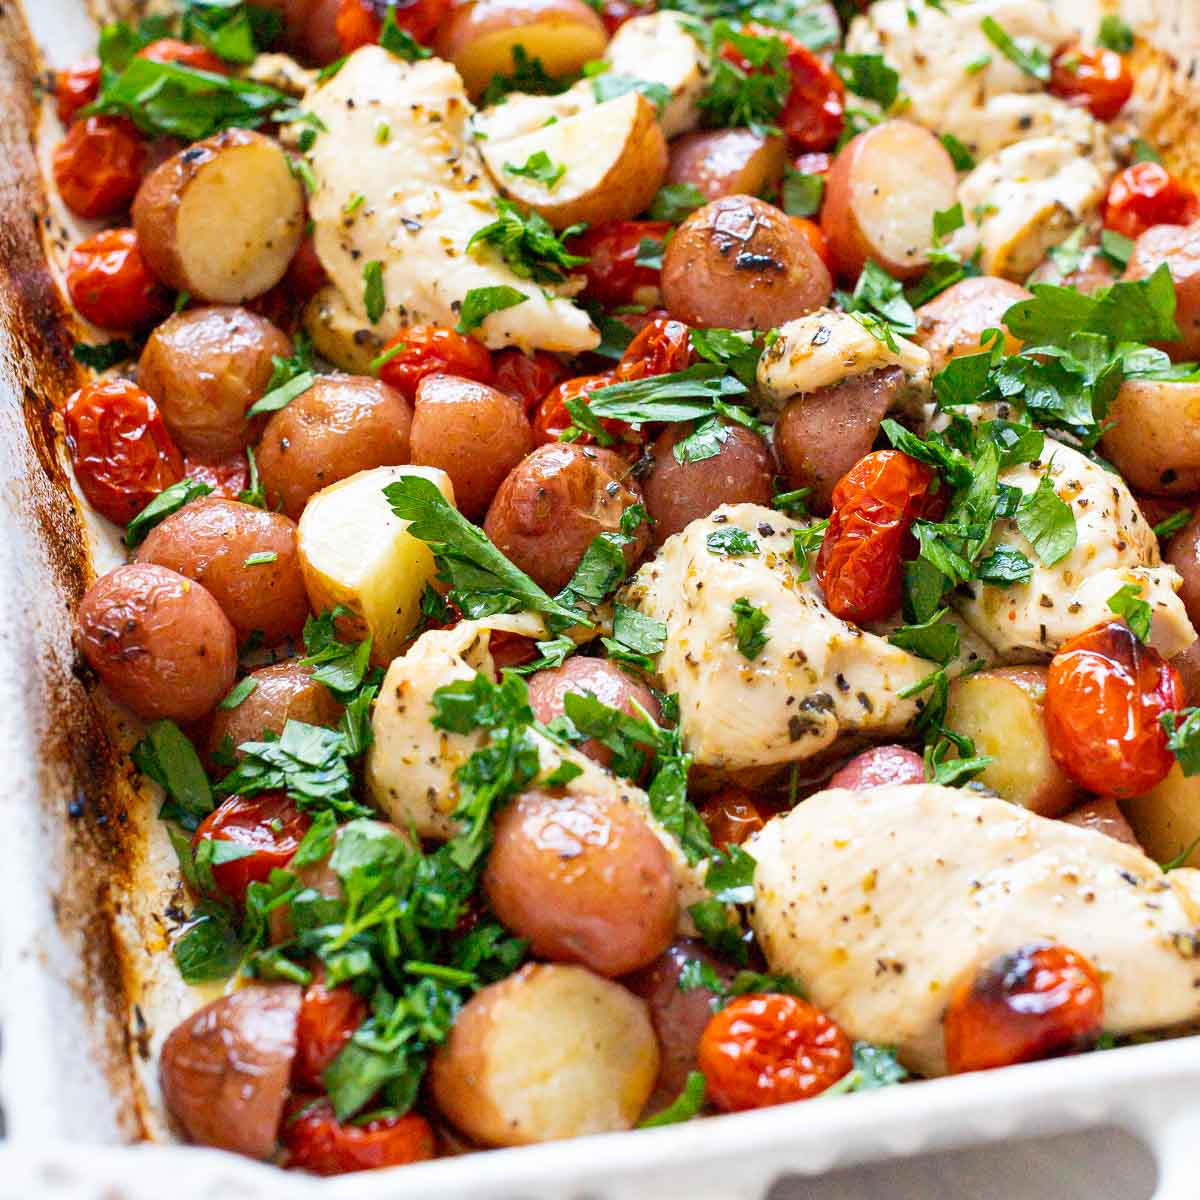 https://ifoodreal.com/wp-content/uploads/2022/09/fg-one-pan-chicken-and-potatoes-3.jpg